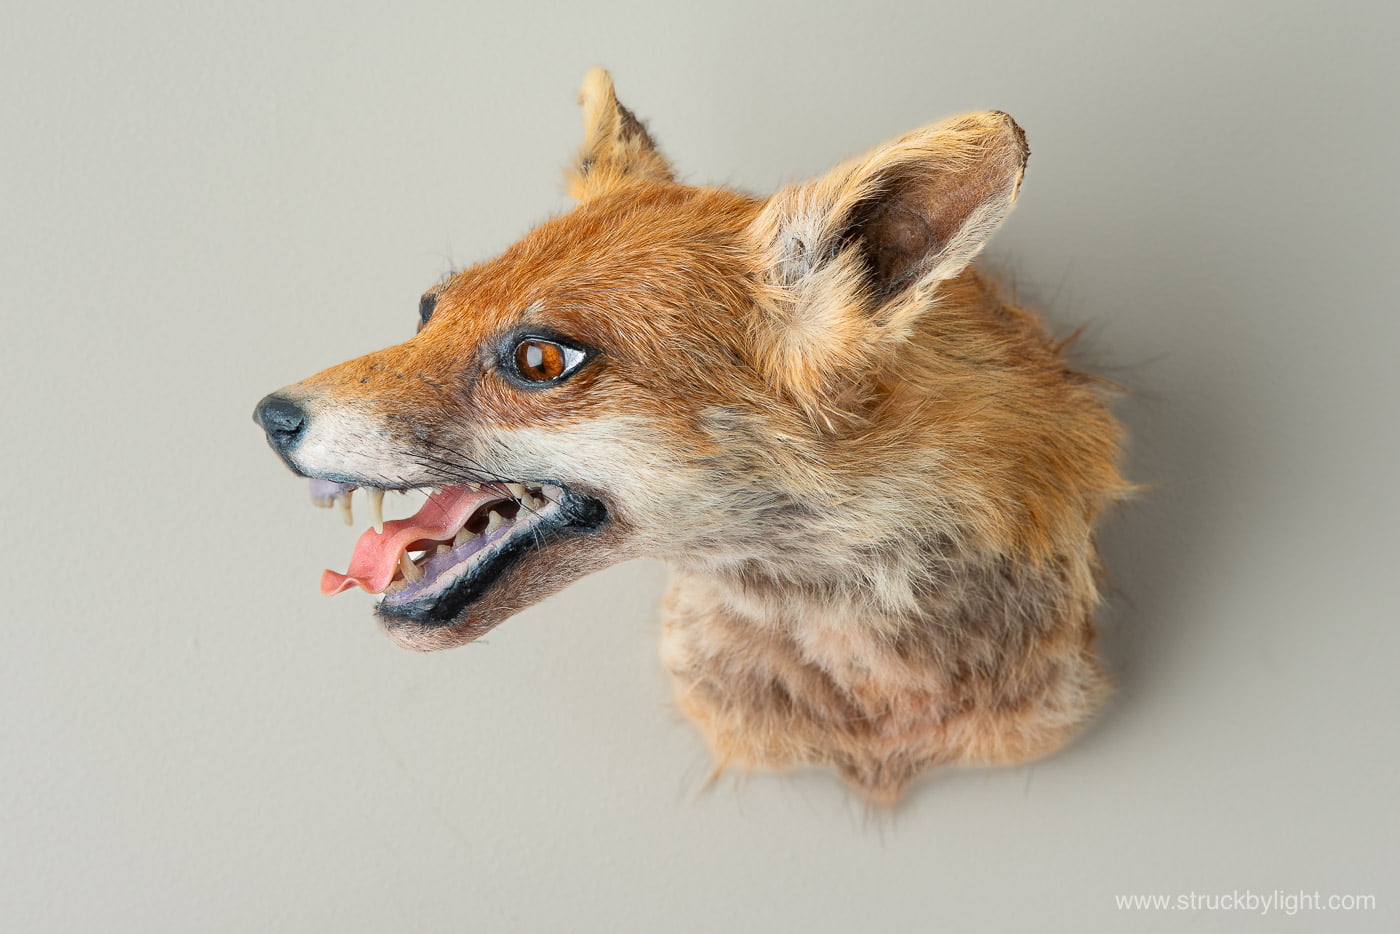 Taxidermy mount of a fox - photographed by Dinil Abeygunawardane - sagepixels product photography and food photography services